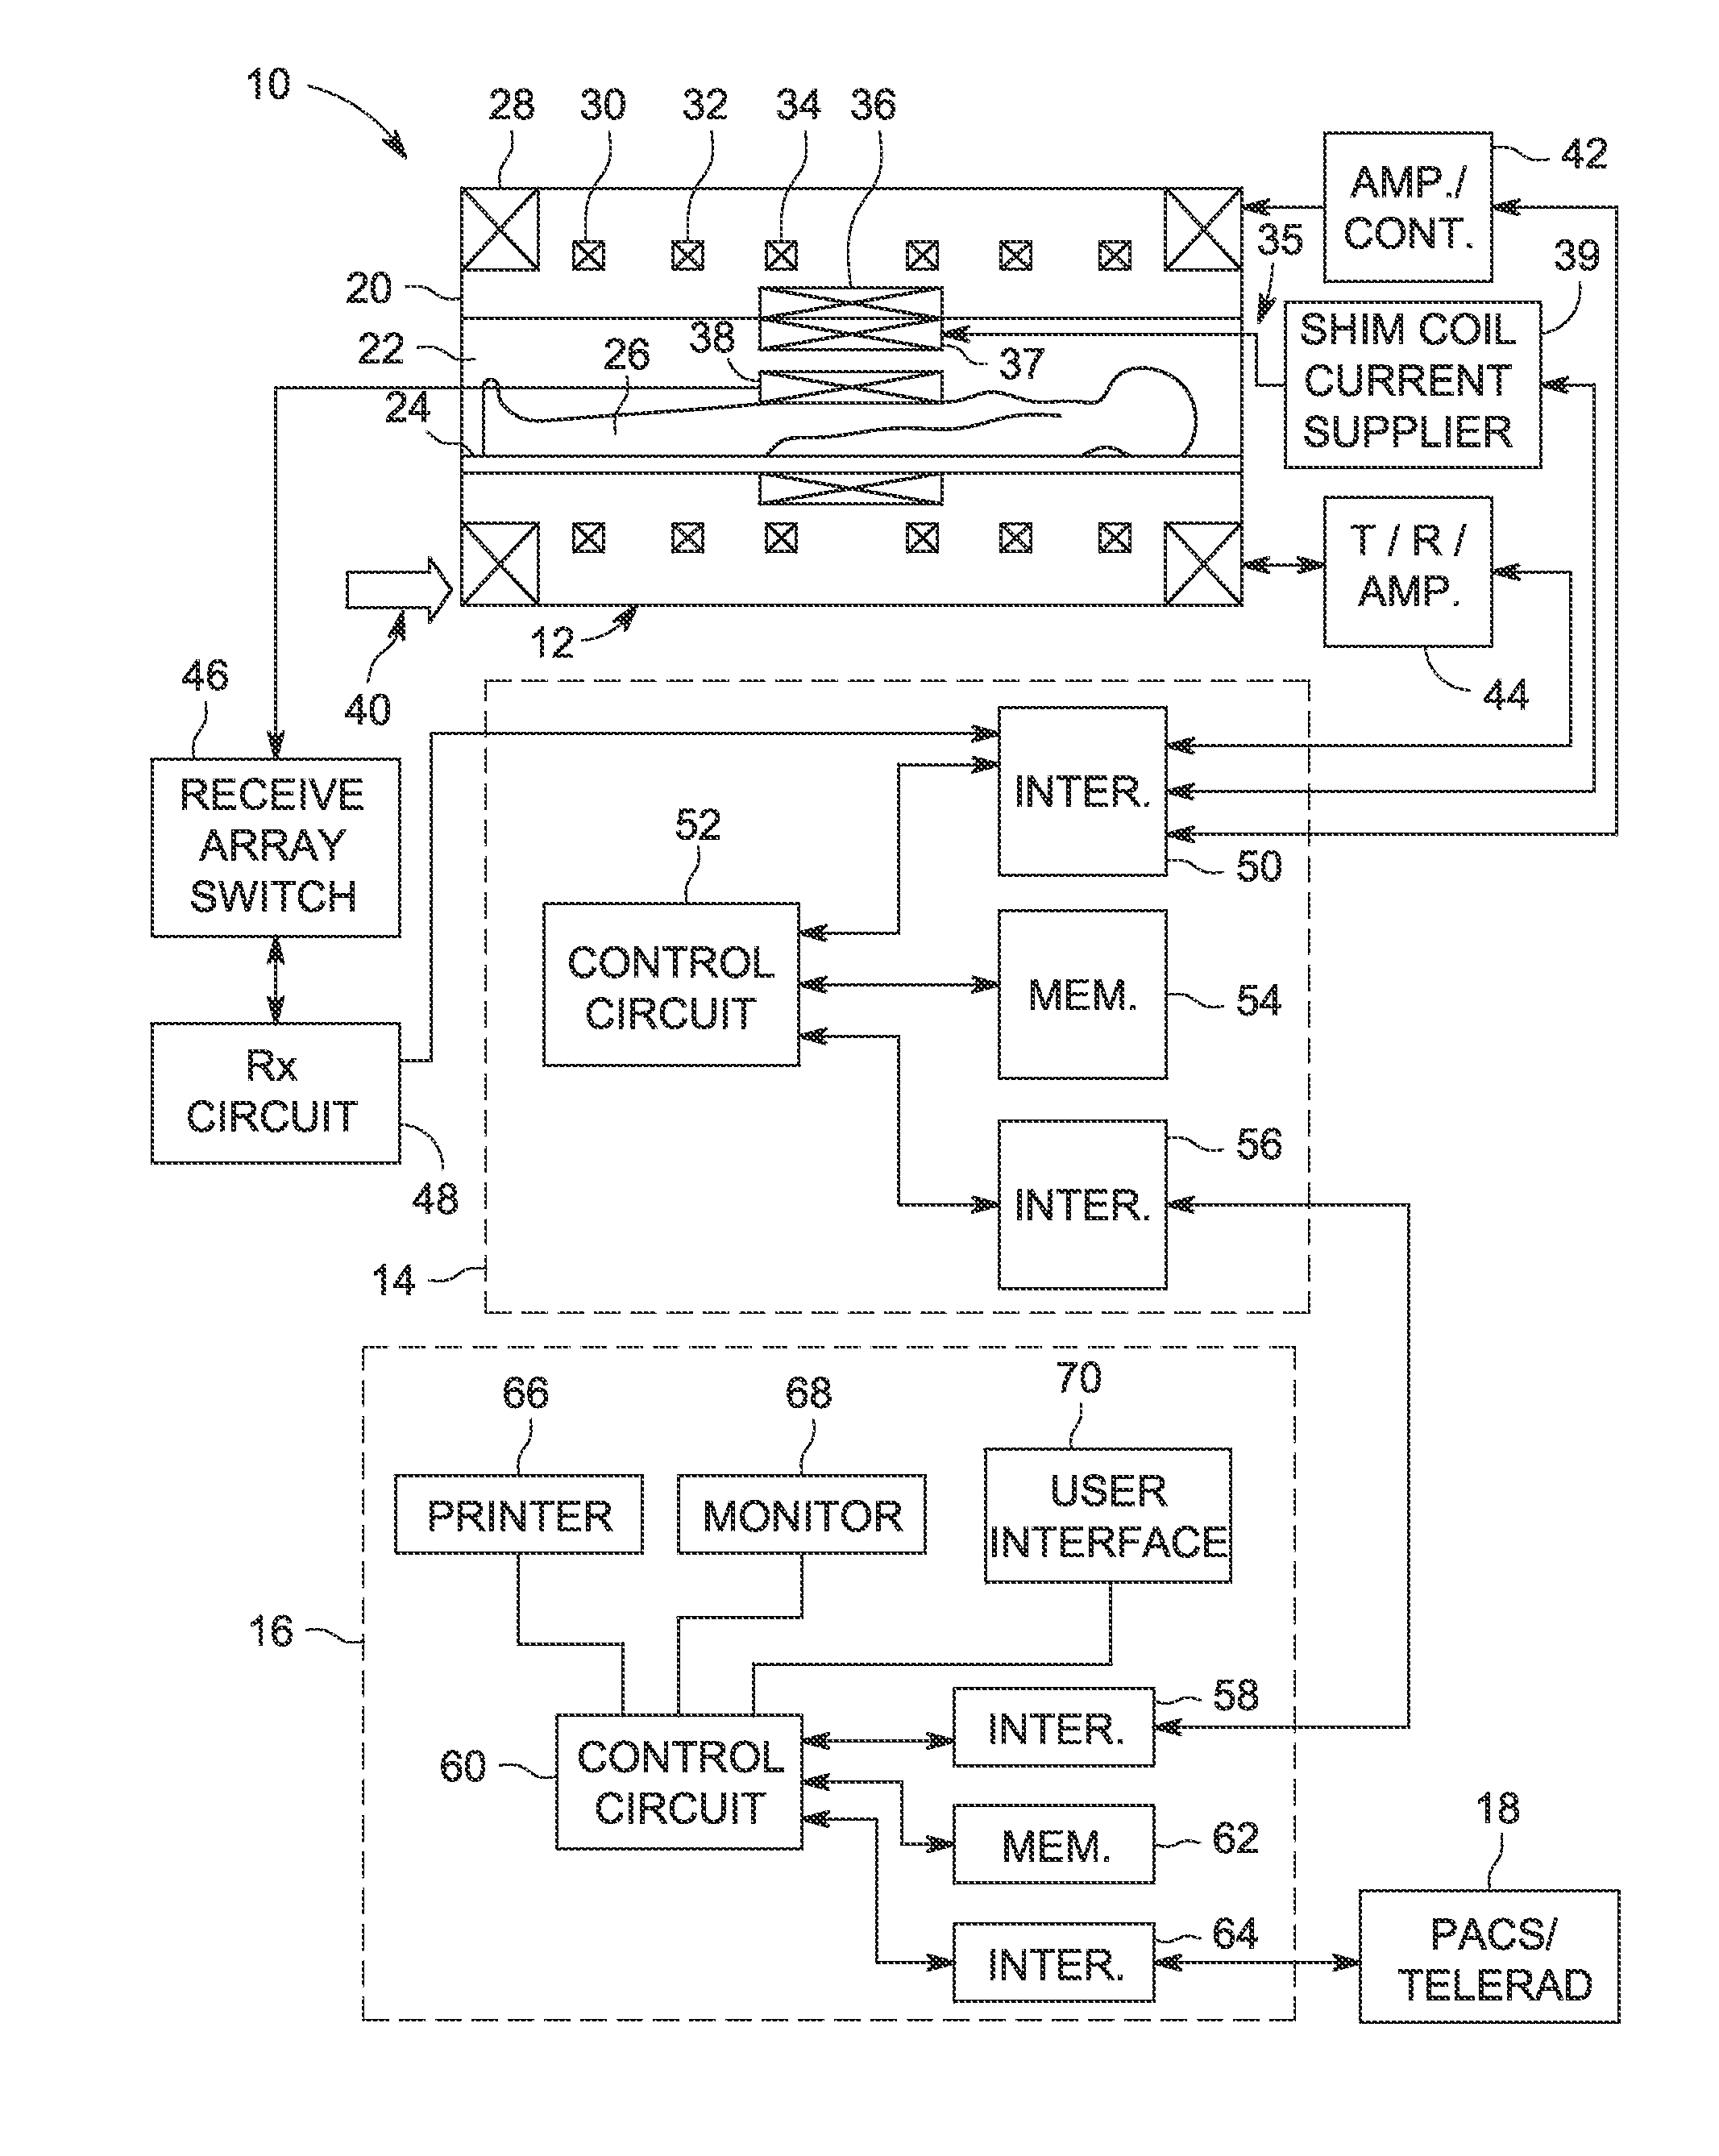 Systems and methods for shim current calculation